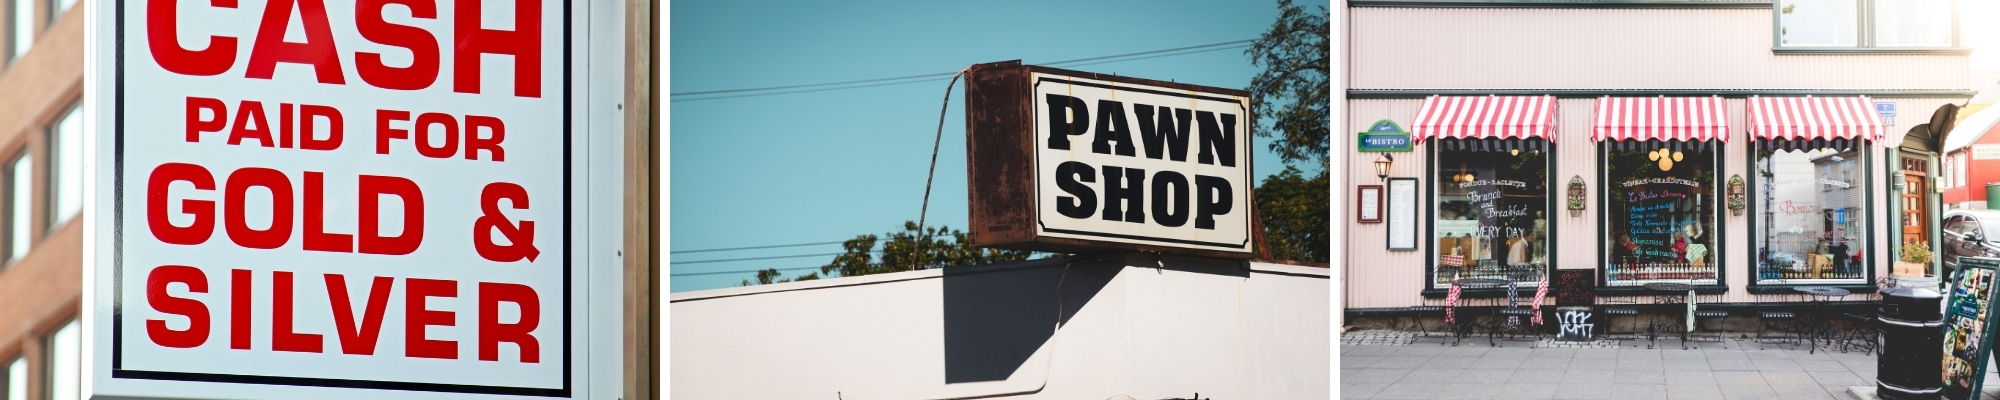 Business Loans for a Pawn Shop